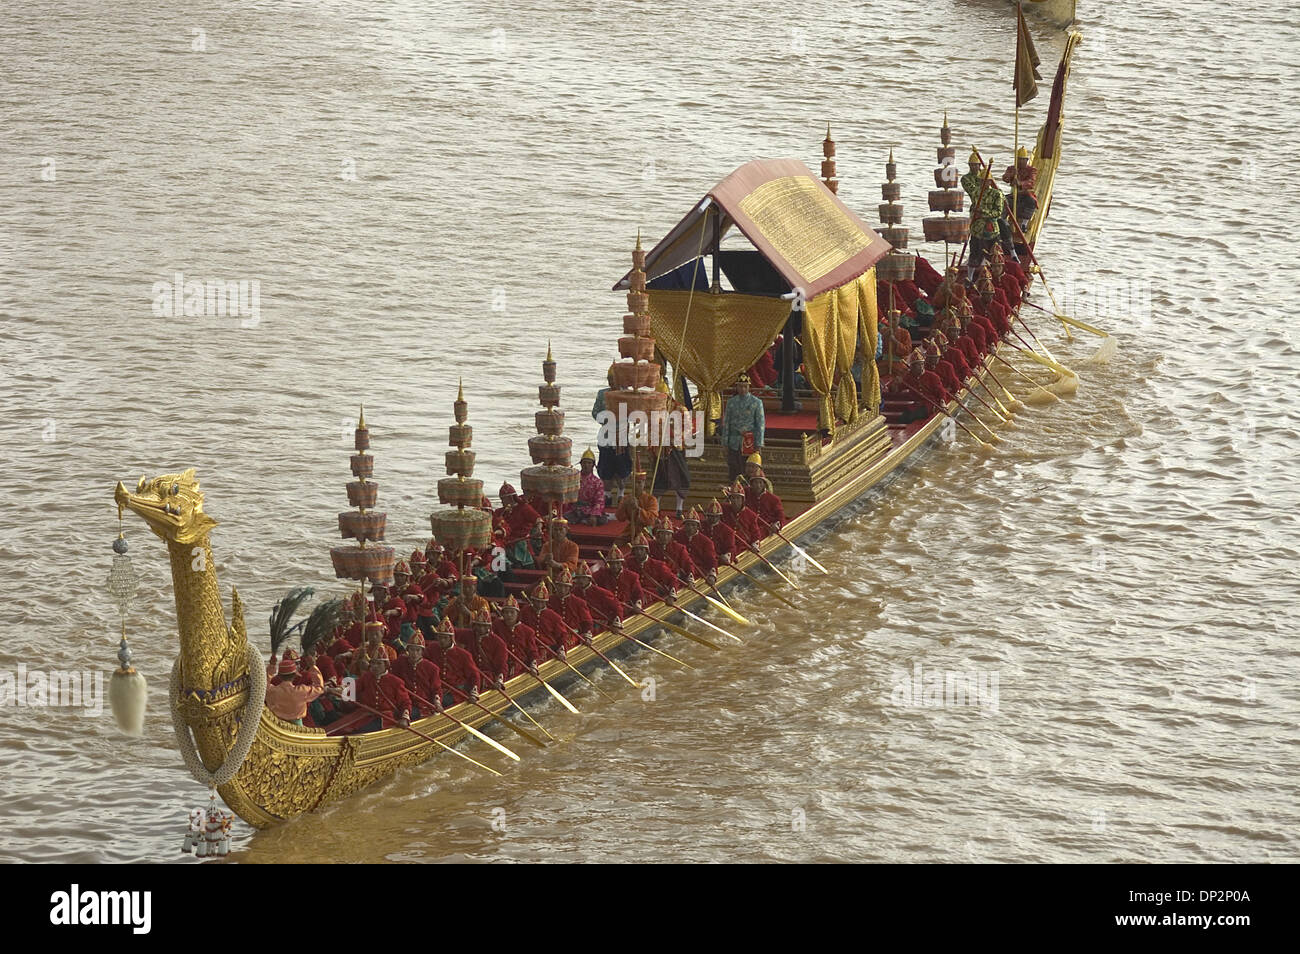 Jun 09, 2006; Bangkok, THAILAND; The royal barge procession is performed in Bangkok, Thailand, as part of the celebrations to mark  the 60th anniversary of the much loved king of Thailand's ascent to the throne. The royal barge procession has been a part of thai tradition since the Ayuthya period (13th-17th century). It takes part to commemorate special royal events such as when a  Stock Photo